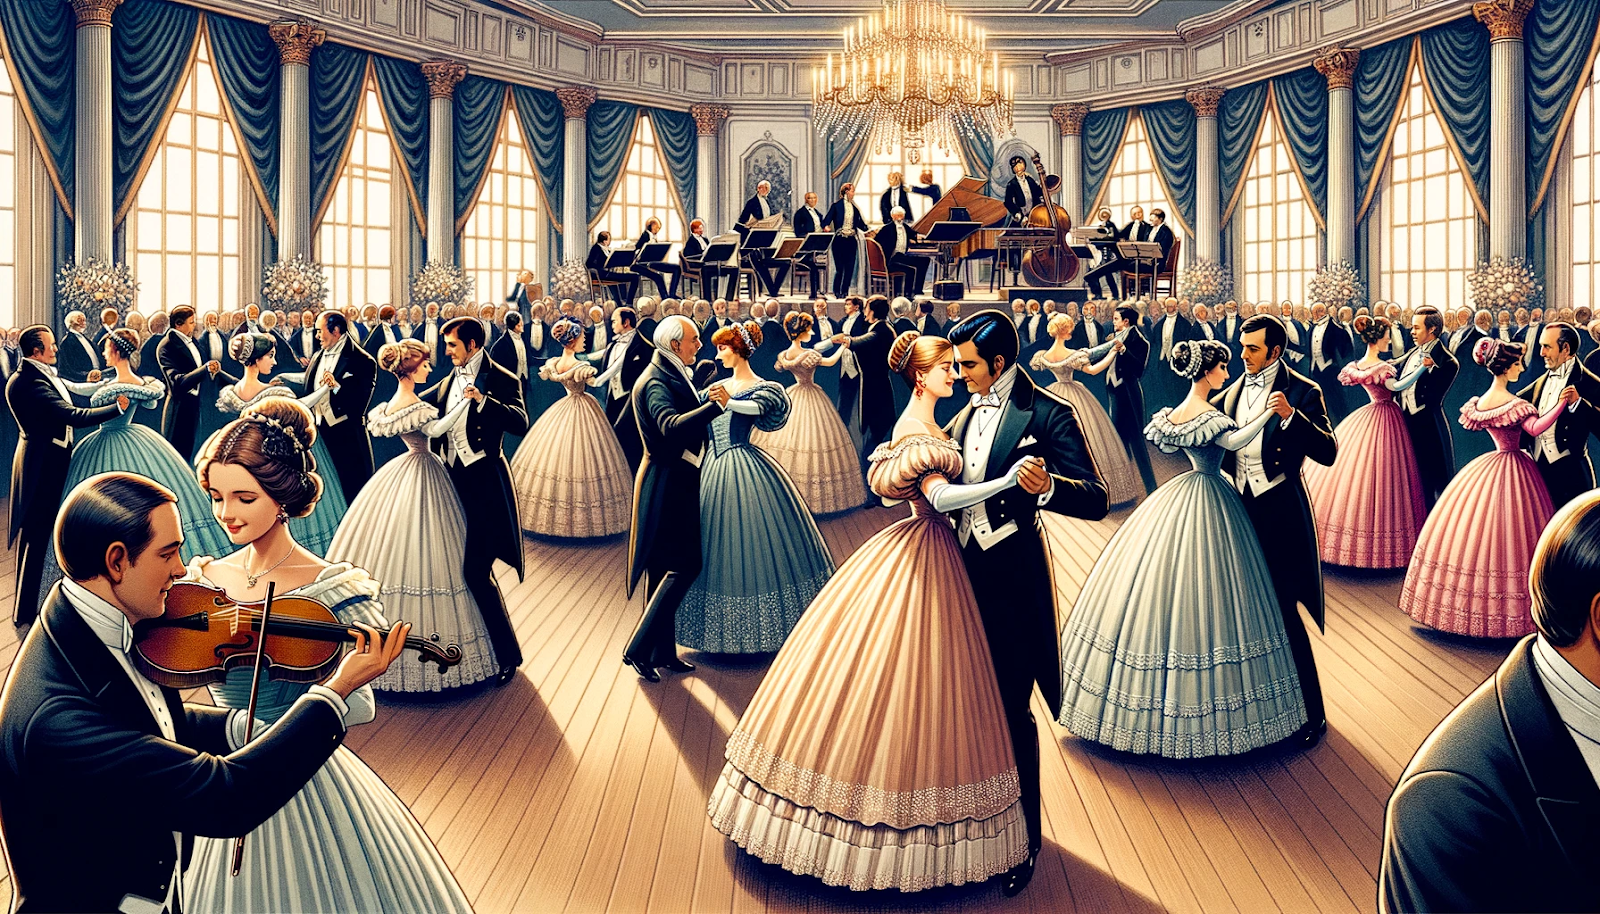 Illustration of a grand ballroom scene from a bygone era. Men in tailored suits and women in elegant ball gowns waltz gracefully on the dance floor. A live orchestra plays a melodious tune in the background. In the midst of the dancers, Jenna, dressed in a period-appropriate gown, observes her great-grandmother, Elizabeth, and her partner, Robert, dancing with undeniable chemistry.